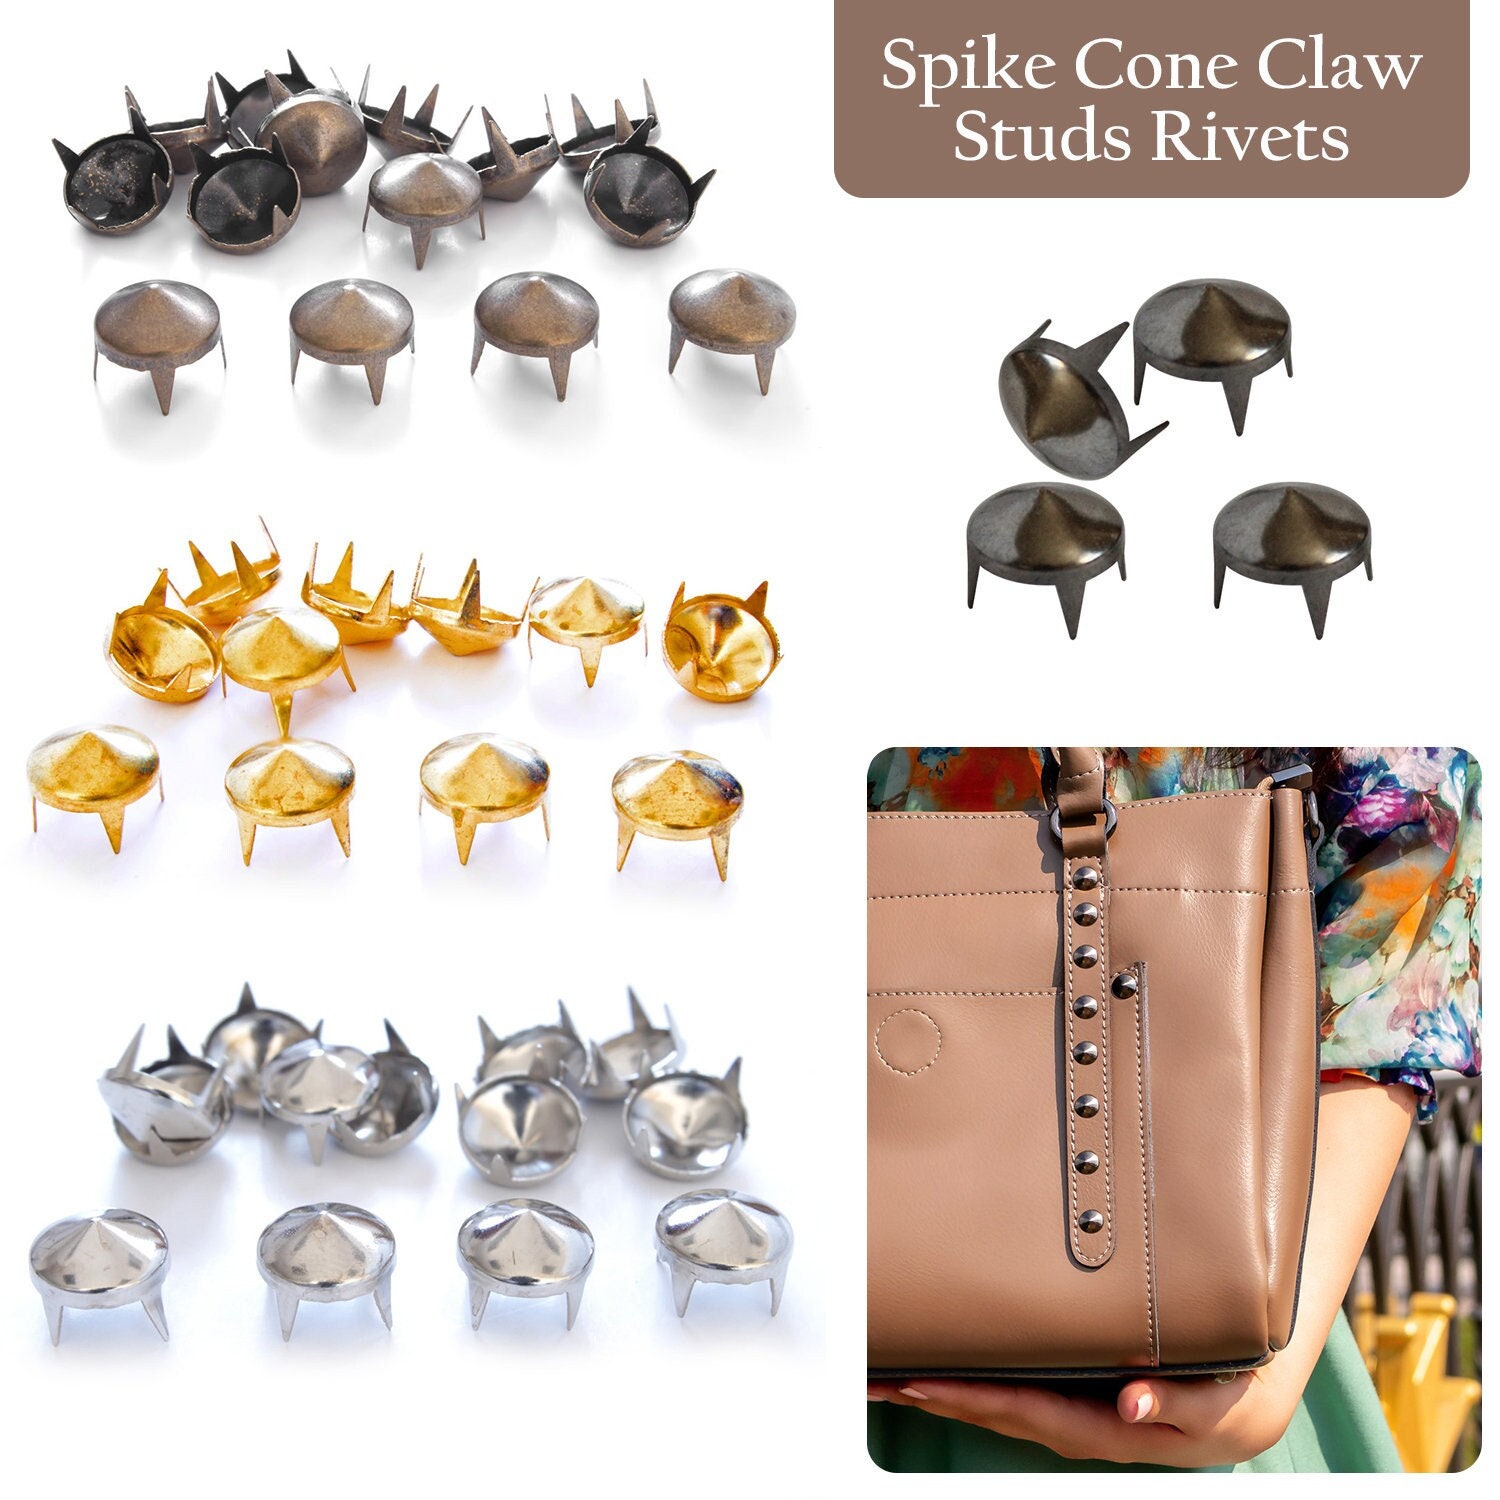 100pcs Punk Studs Cone Spike Spot Cool Rivets With Brass Pins for Leather  Jacket Belt Bags, Purses, Clothing DIY Crafts Supplies 11mm/13mm 